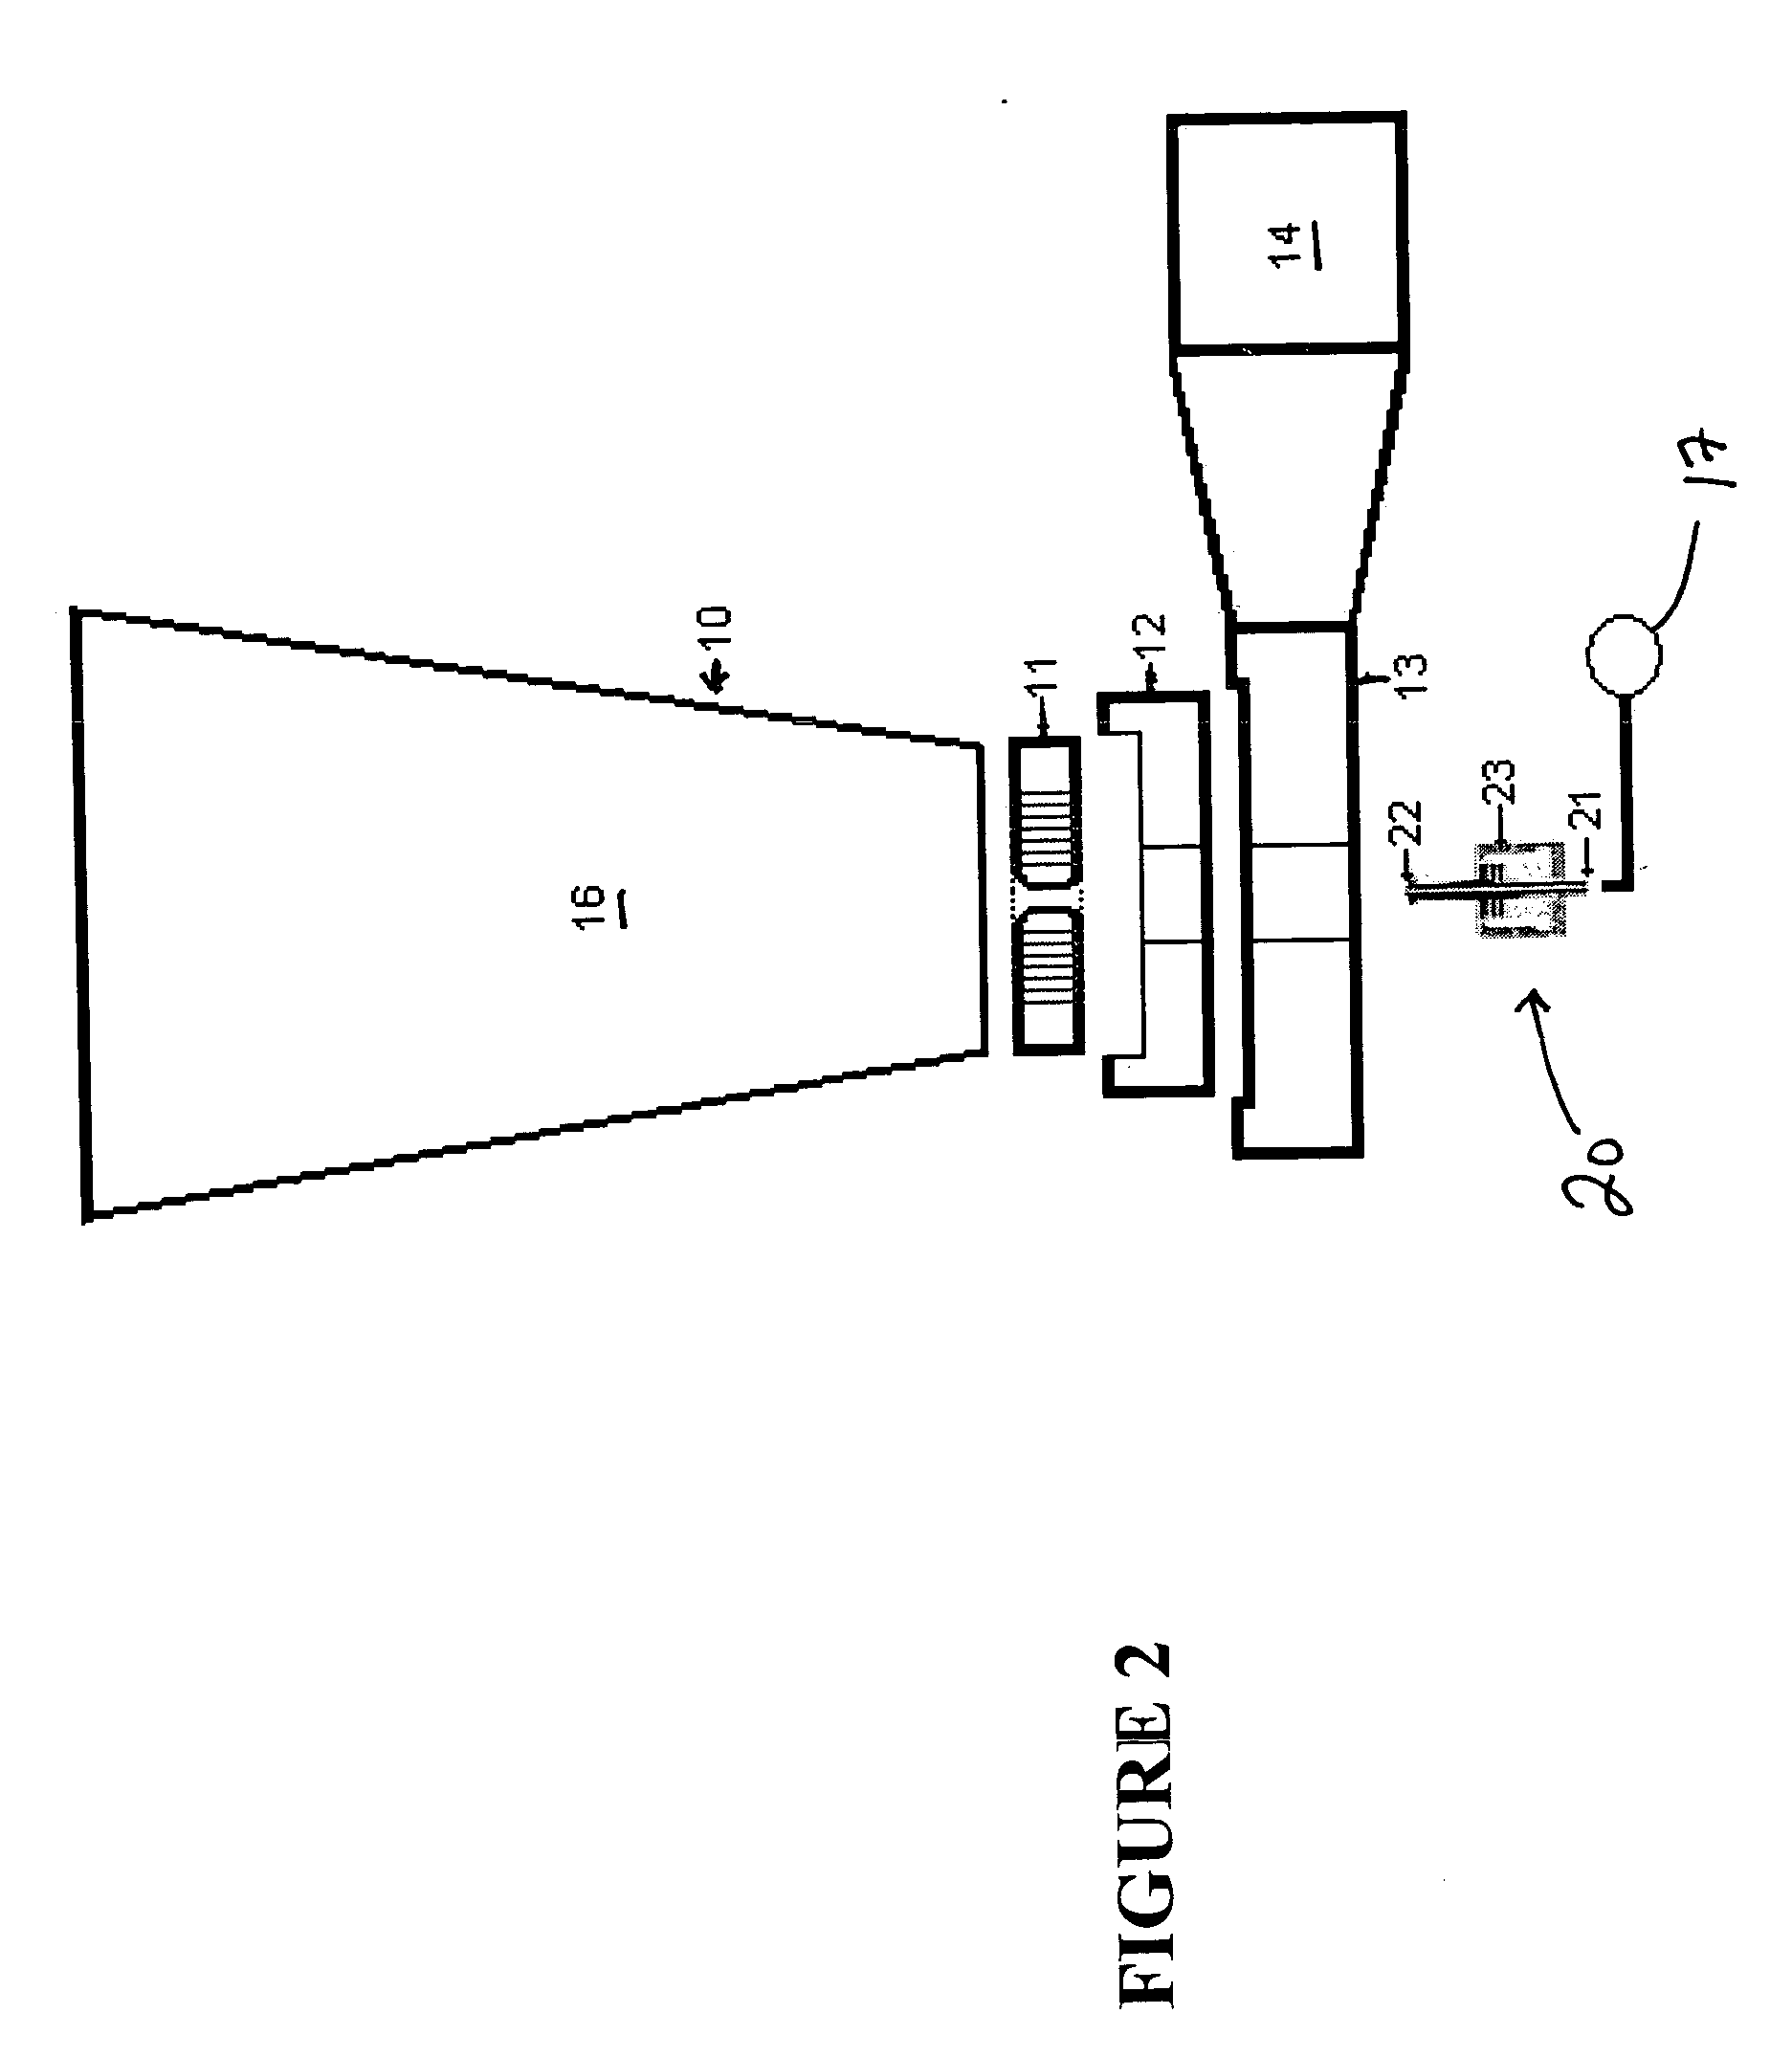 Ultrasonic nozzle for coating a medical appliance and method for using an ultrasonic nozzle to coat a medical appliance